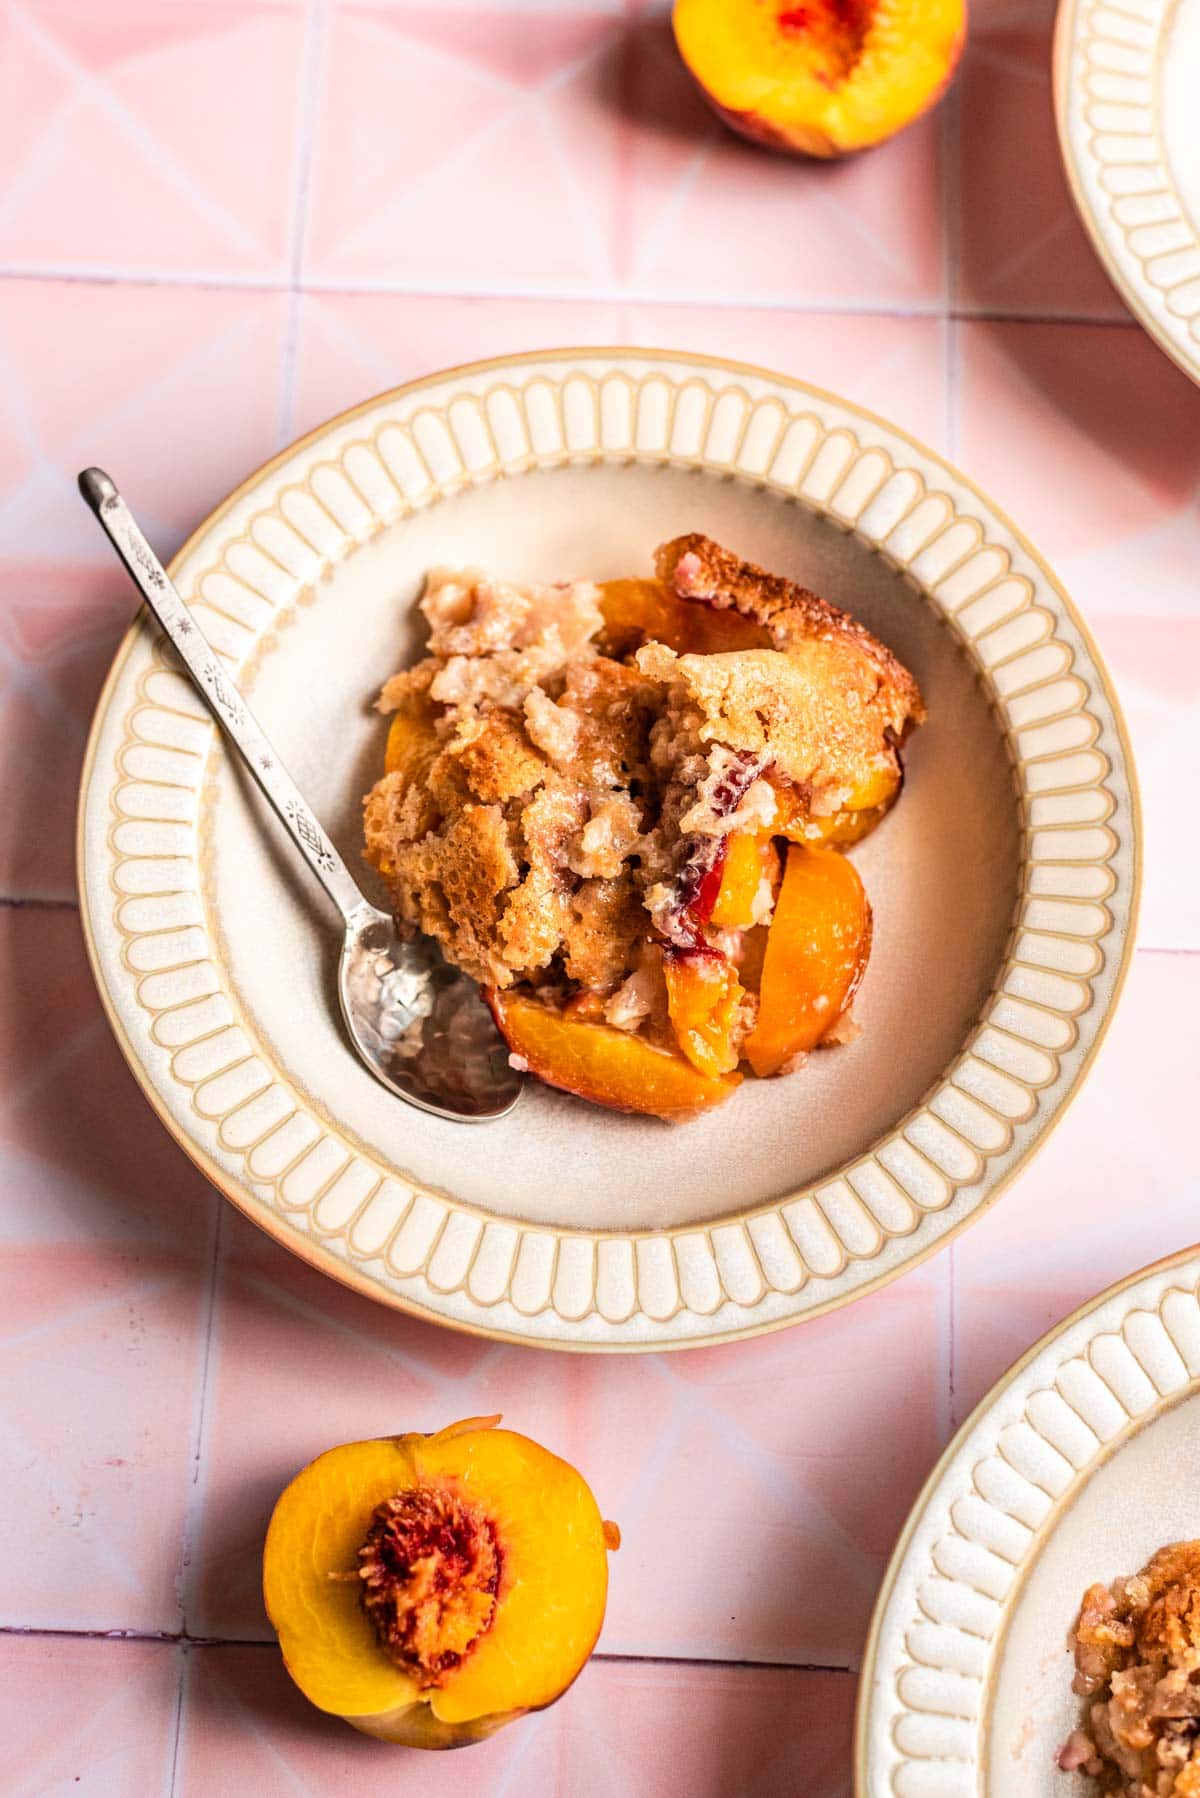 Cakey peach cobbler in a beige bowl on a pink tile table.